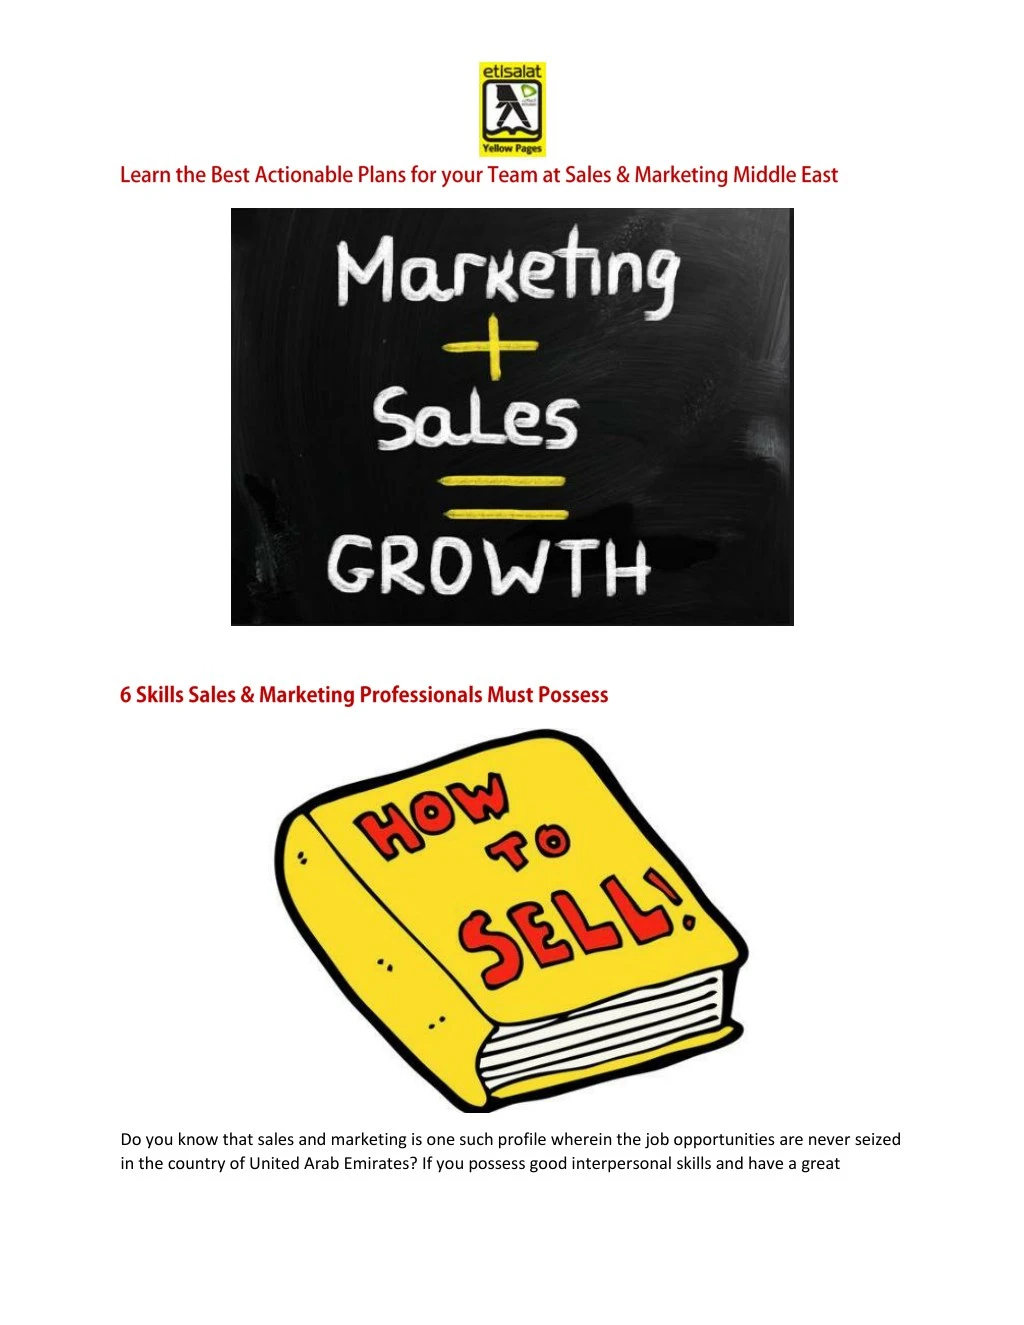 do you know that sales and marketing is one such